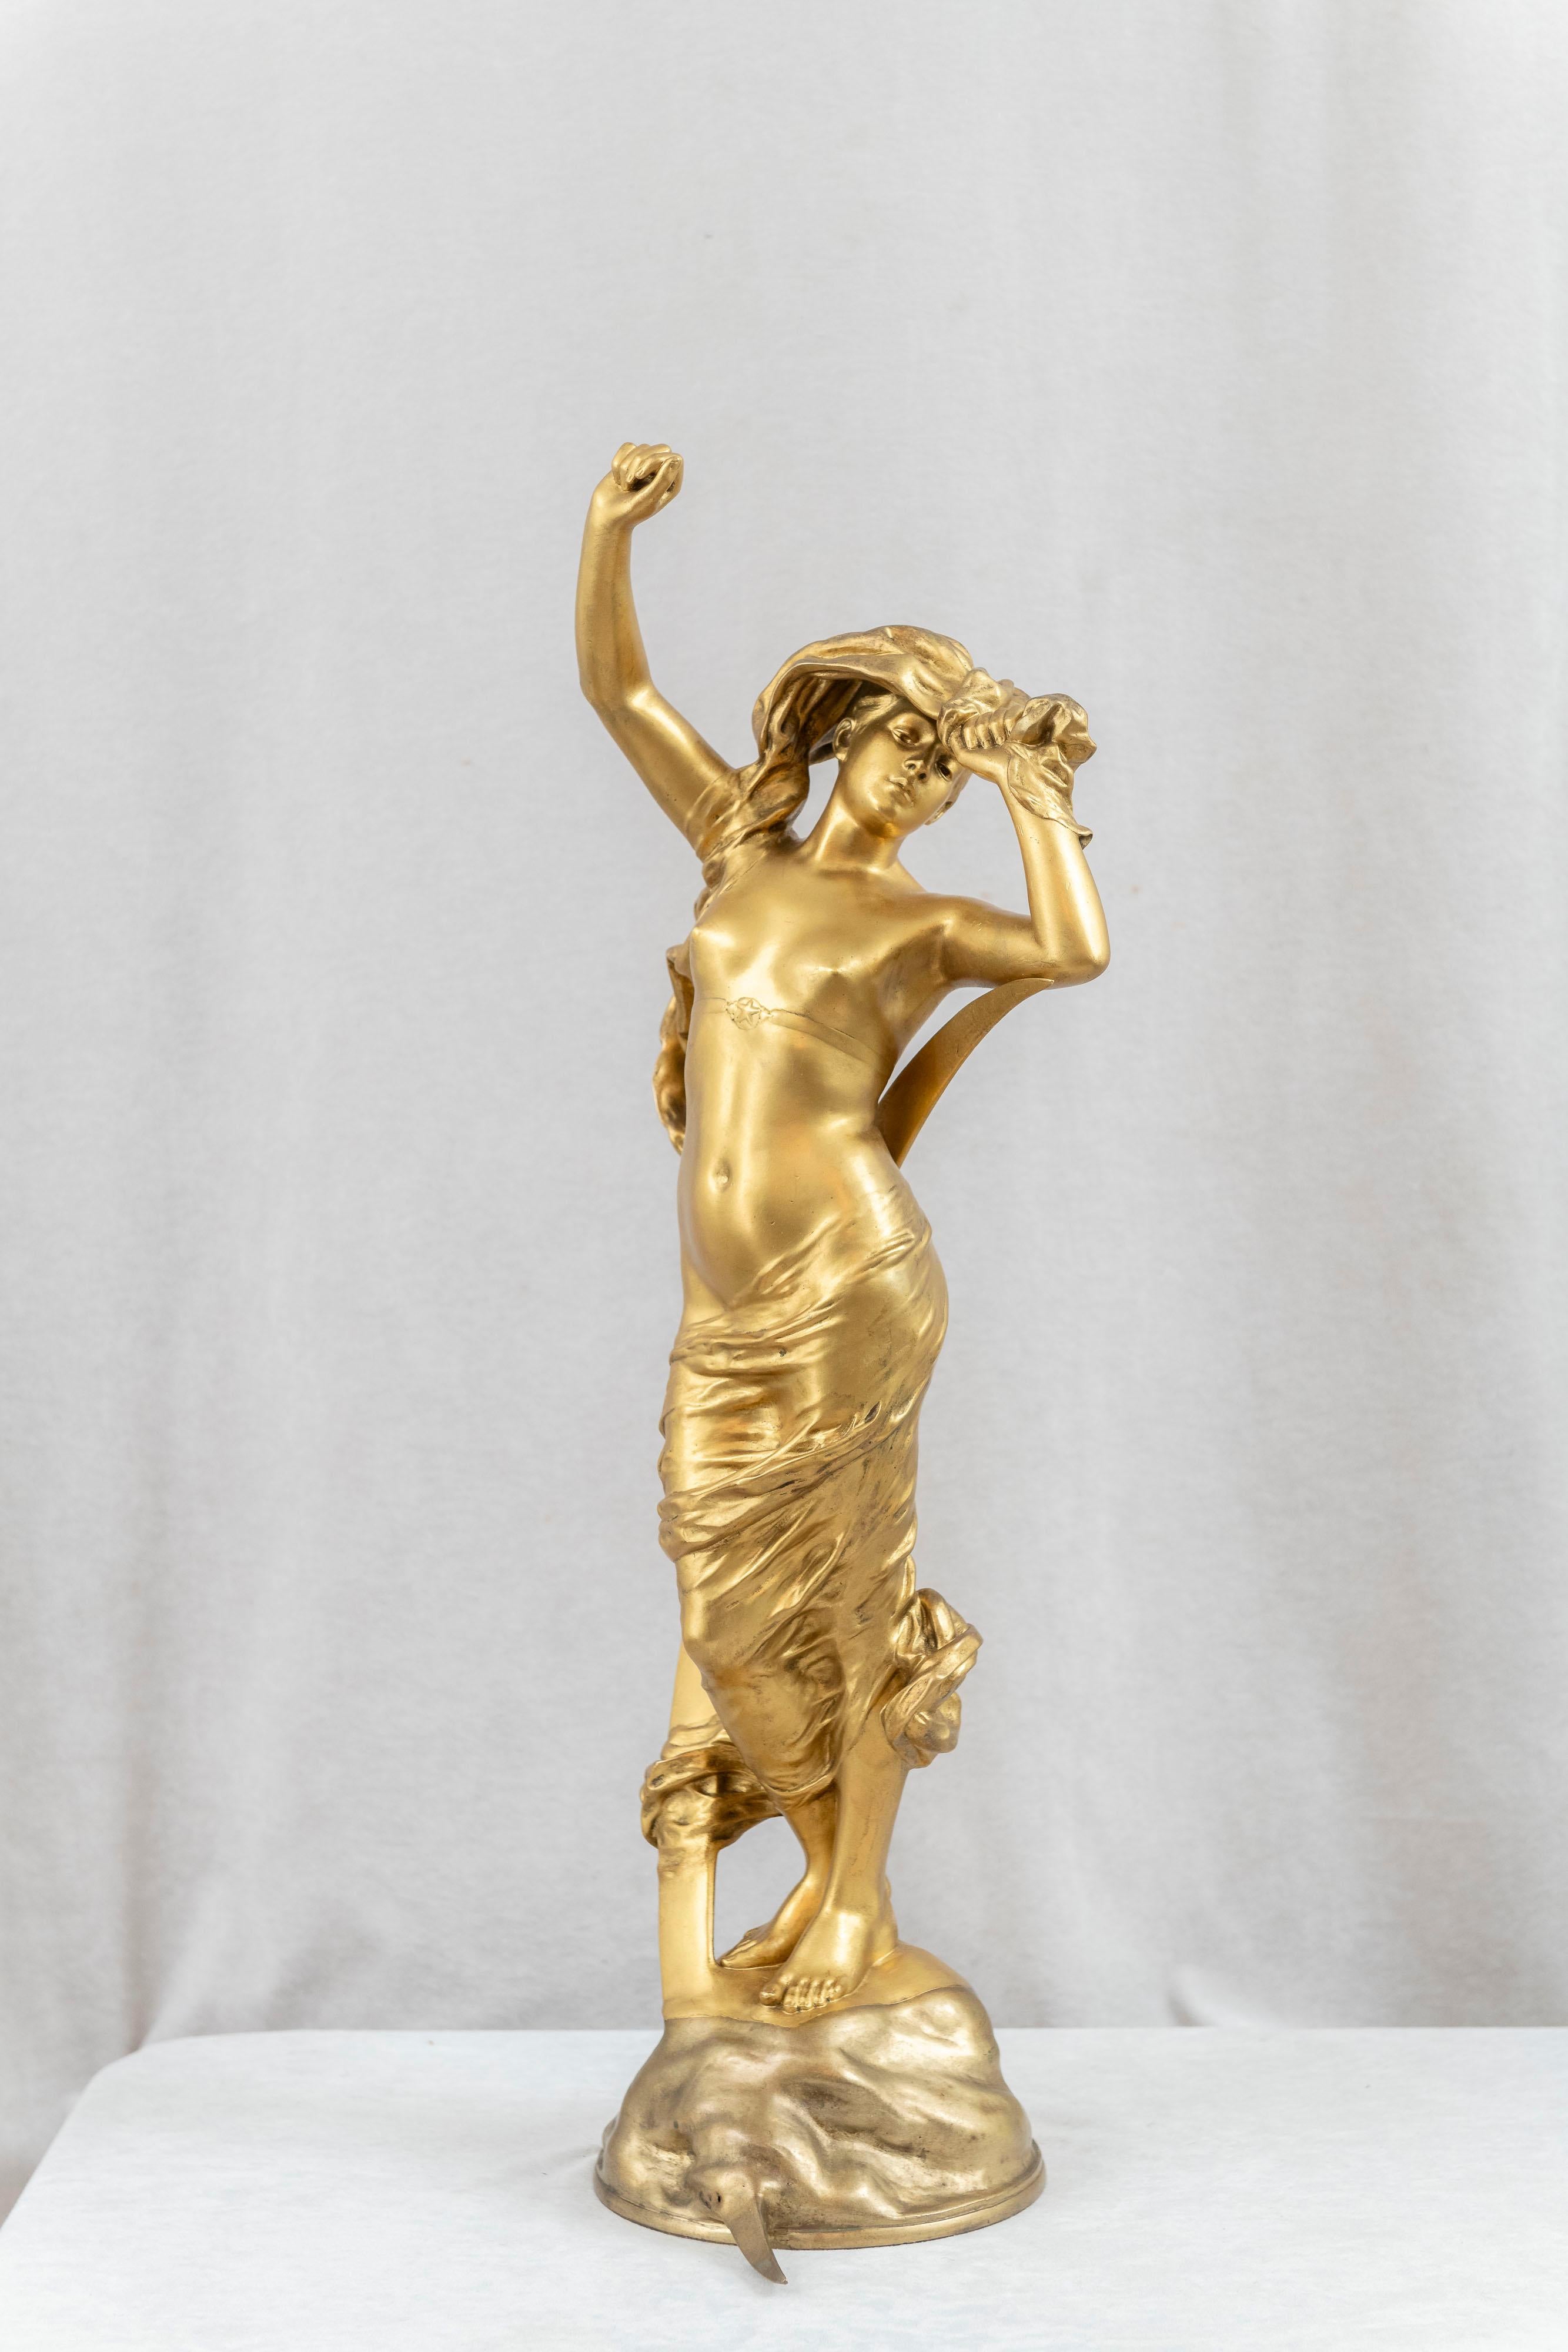 This large and sexy gilt bronze figure of a scantily clad maiden is a great example of the art nouveau movement. Titled 